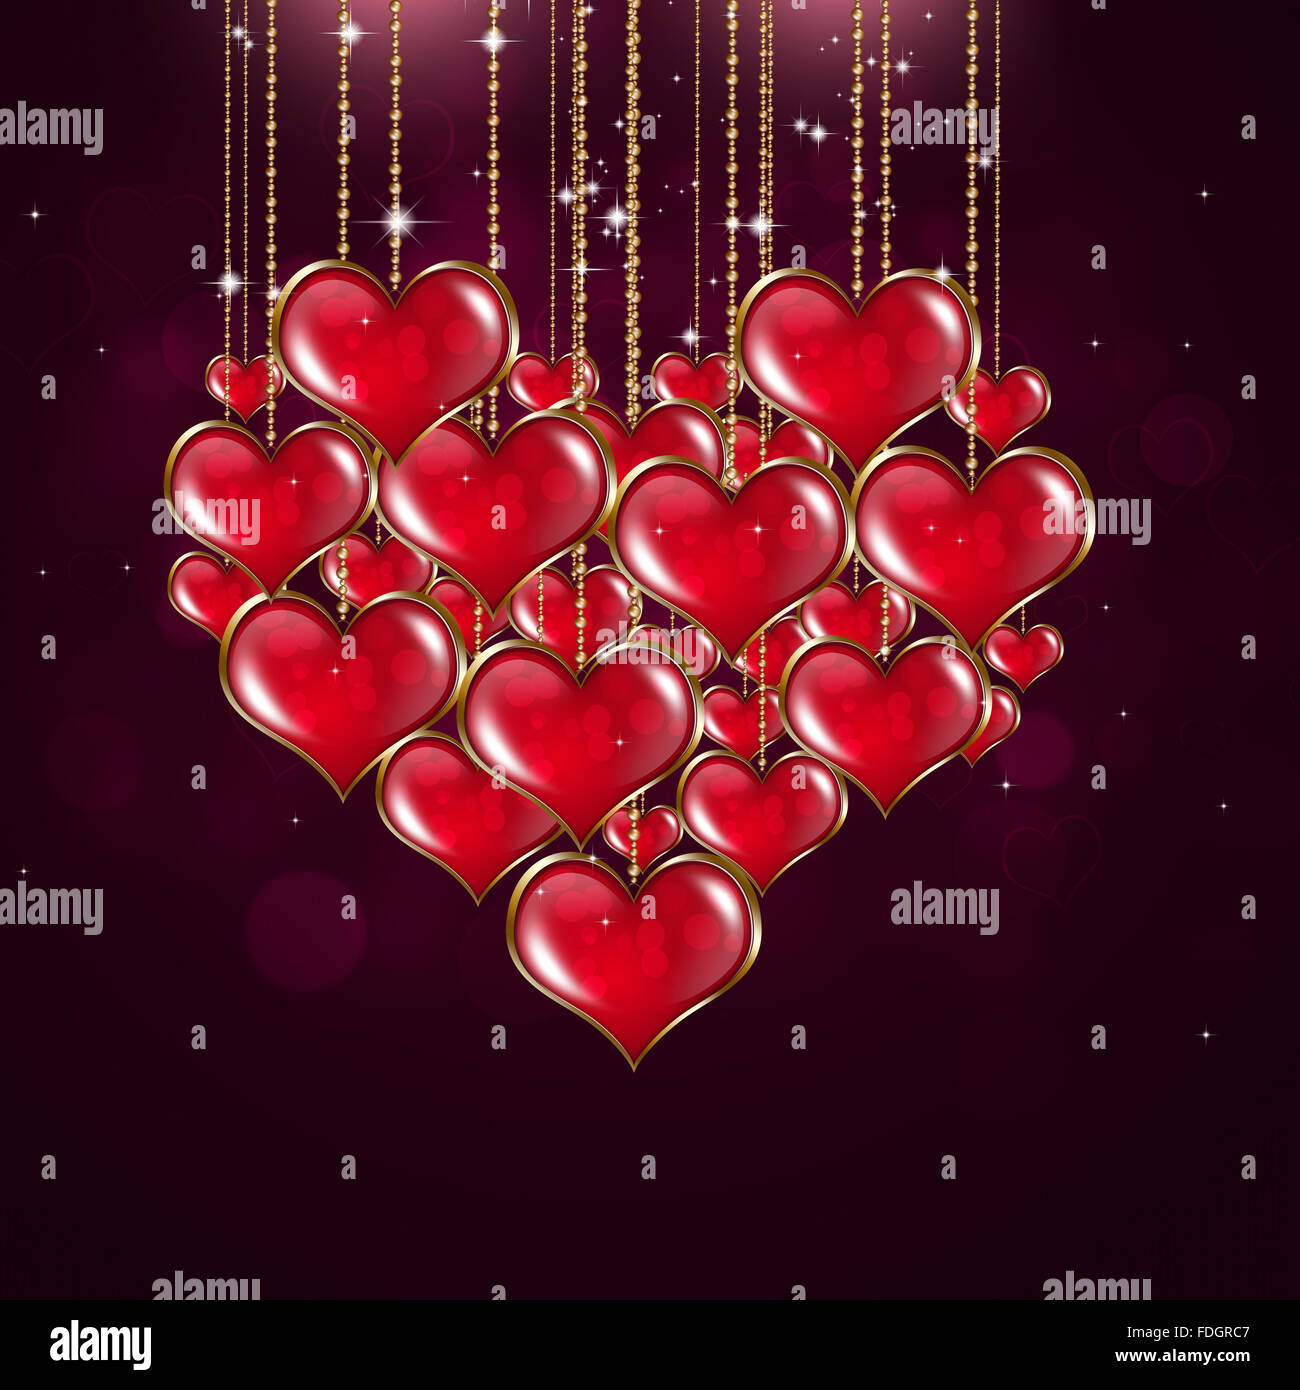 valentine holiday greeting card with red hearts stars and blurry lights Stock Photo